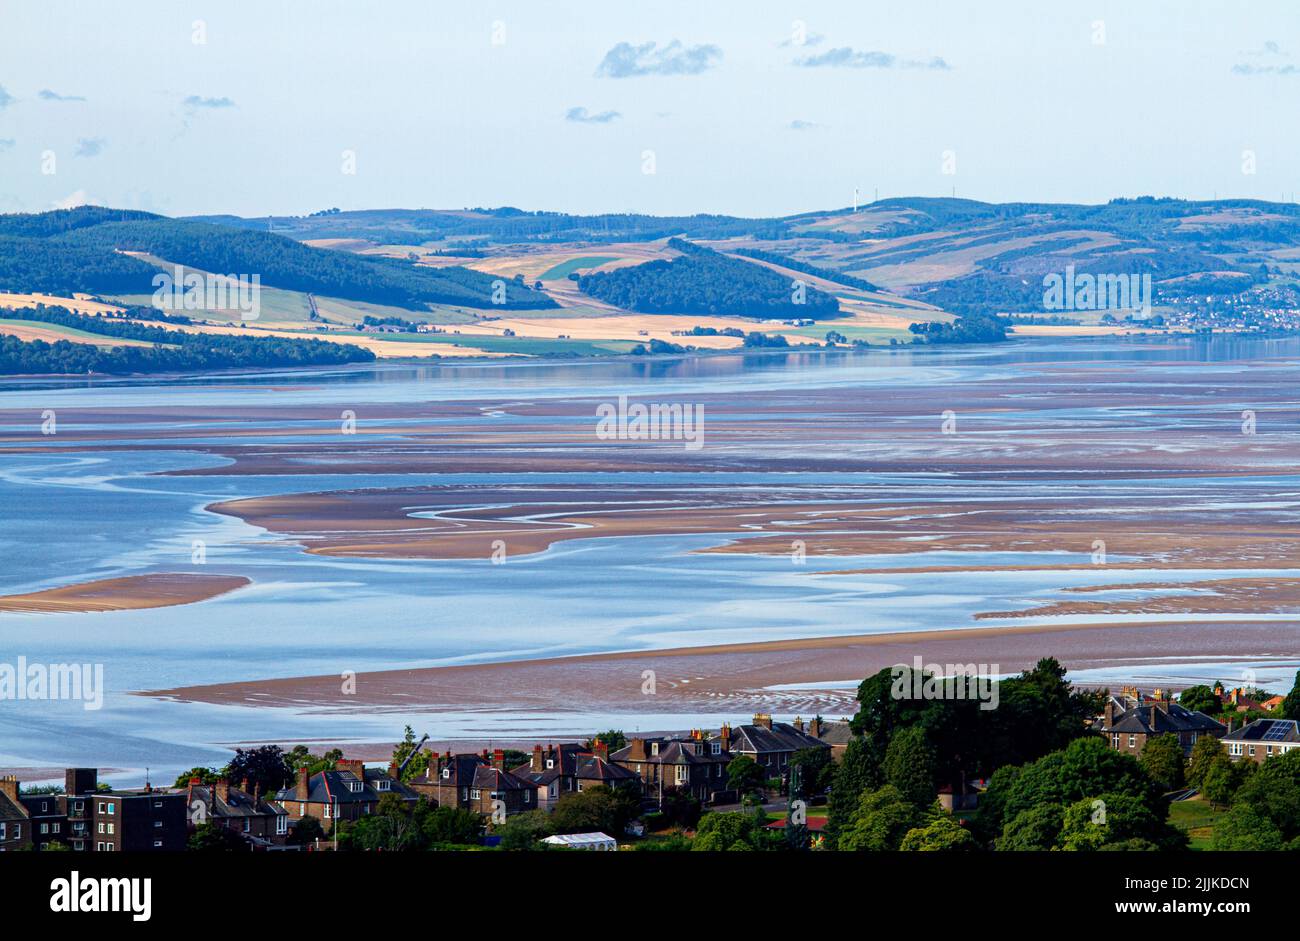 Dundee, Tayside, Scotland, UK. 27th July, 2022. UK Weather: A warm and dry sunny July morning  across North East Scotland with temperatures reaching 18°C. The colourful landscape of Dundee City and the  River Tay at low tide as seen from the 'Law,' the remains of a volcanic sill and the city's central and highest point. Credit: Dundee Photographics/Alamy Live News Stock Photo